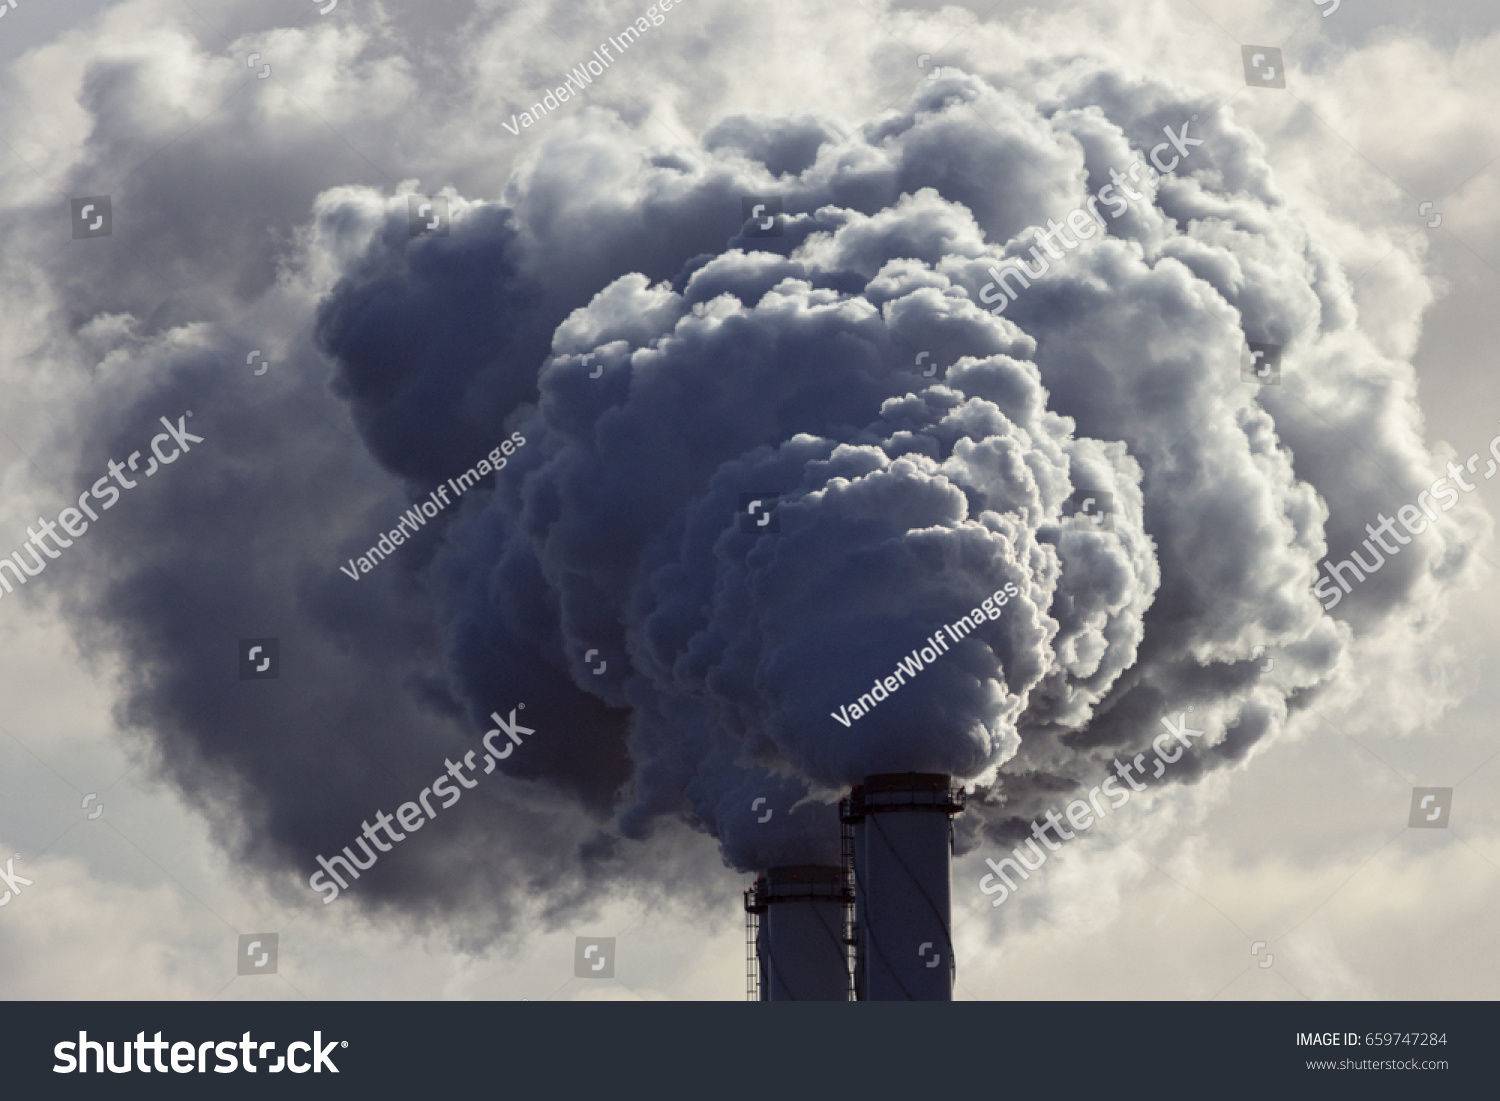 Air pollution from power plant chimneys. #659747284